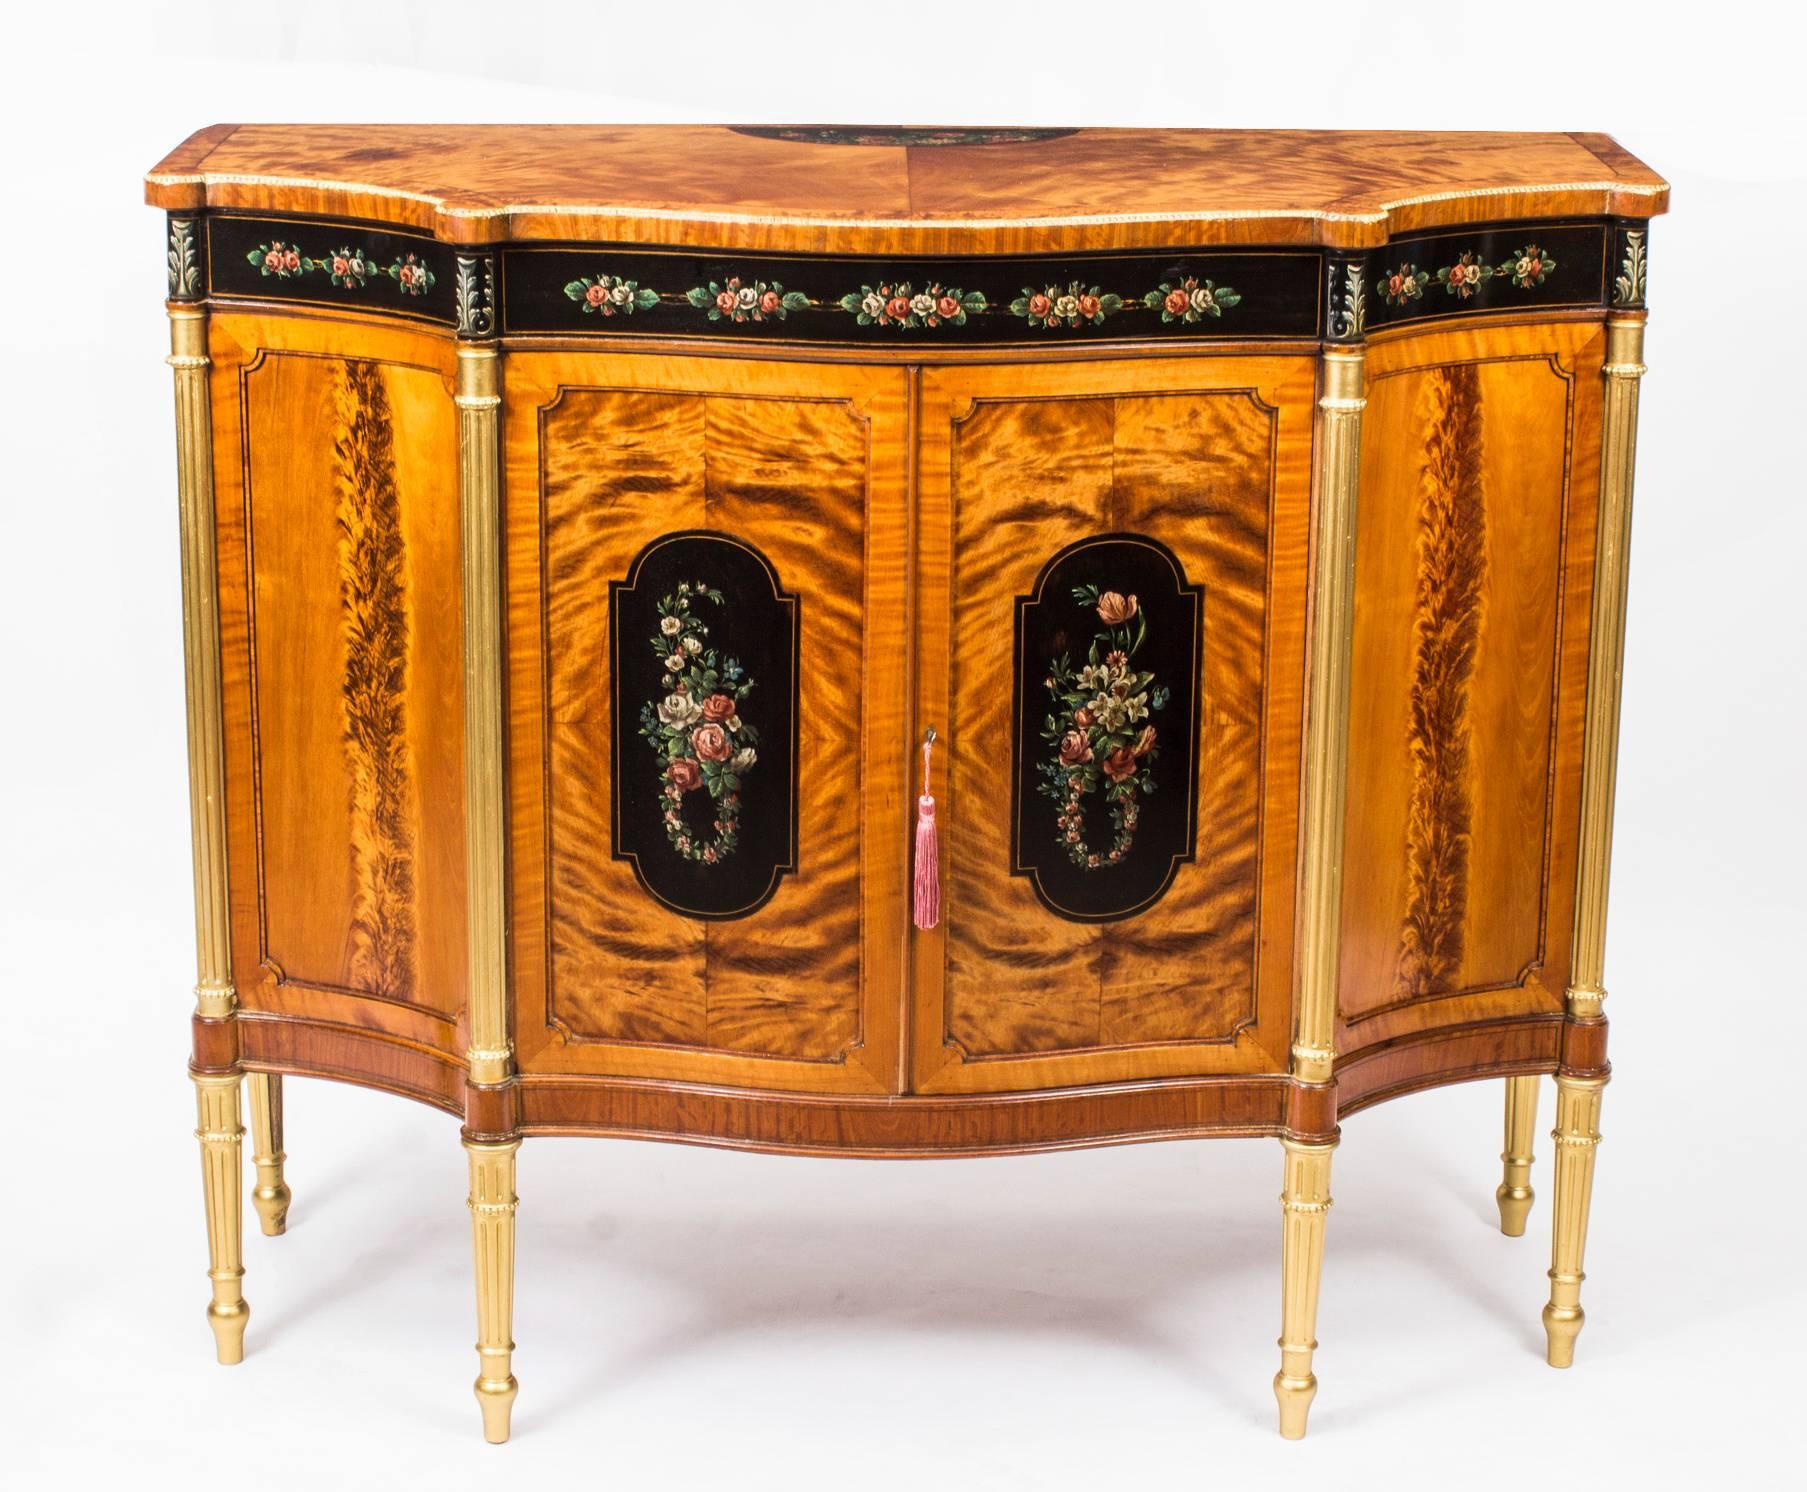 A stunning English Edwardian hand-painted and inlaid shaped serpentine satinwood side cabinet, circa 1900 in date and of the very highest quality.

With exquisite hand-painted floral decoration on an ebonised ground, in the manner of Angelica